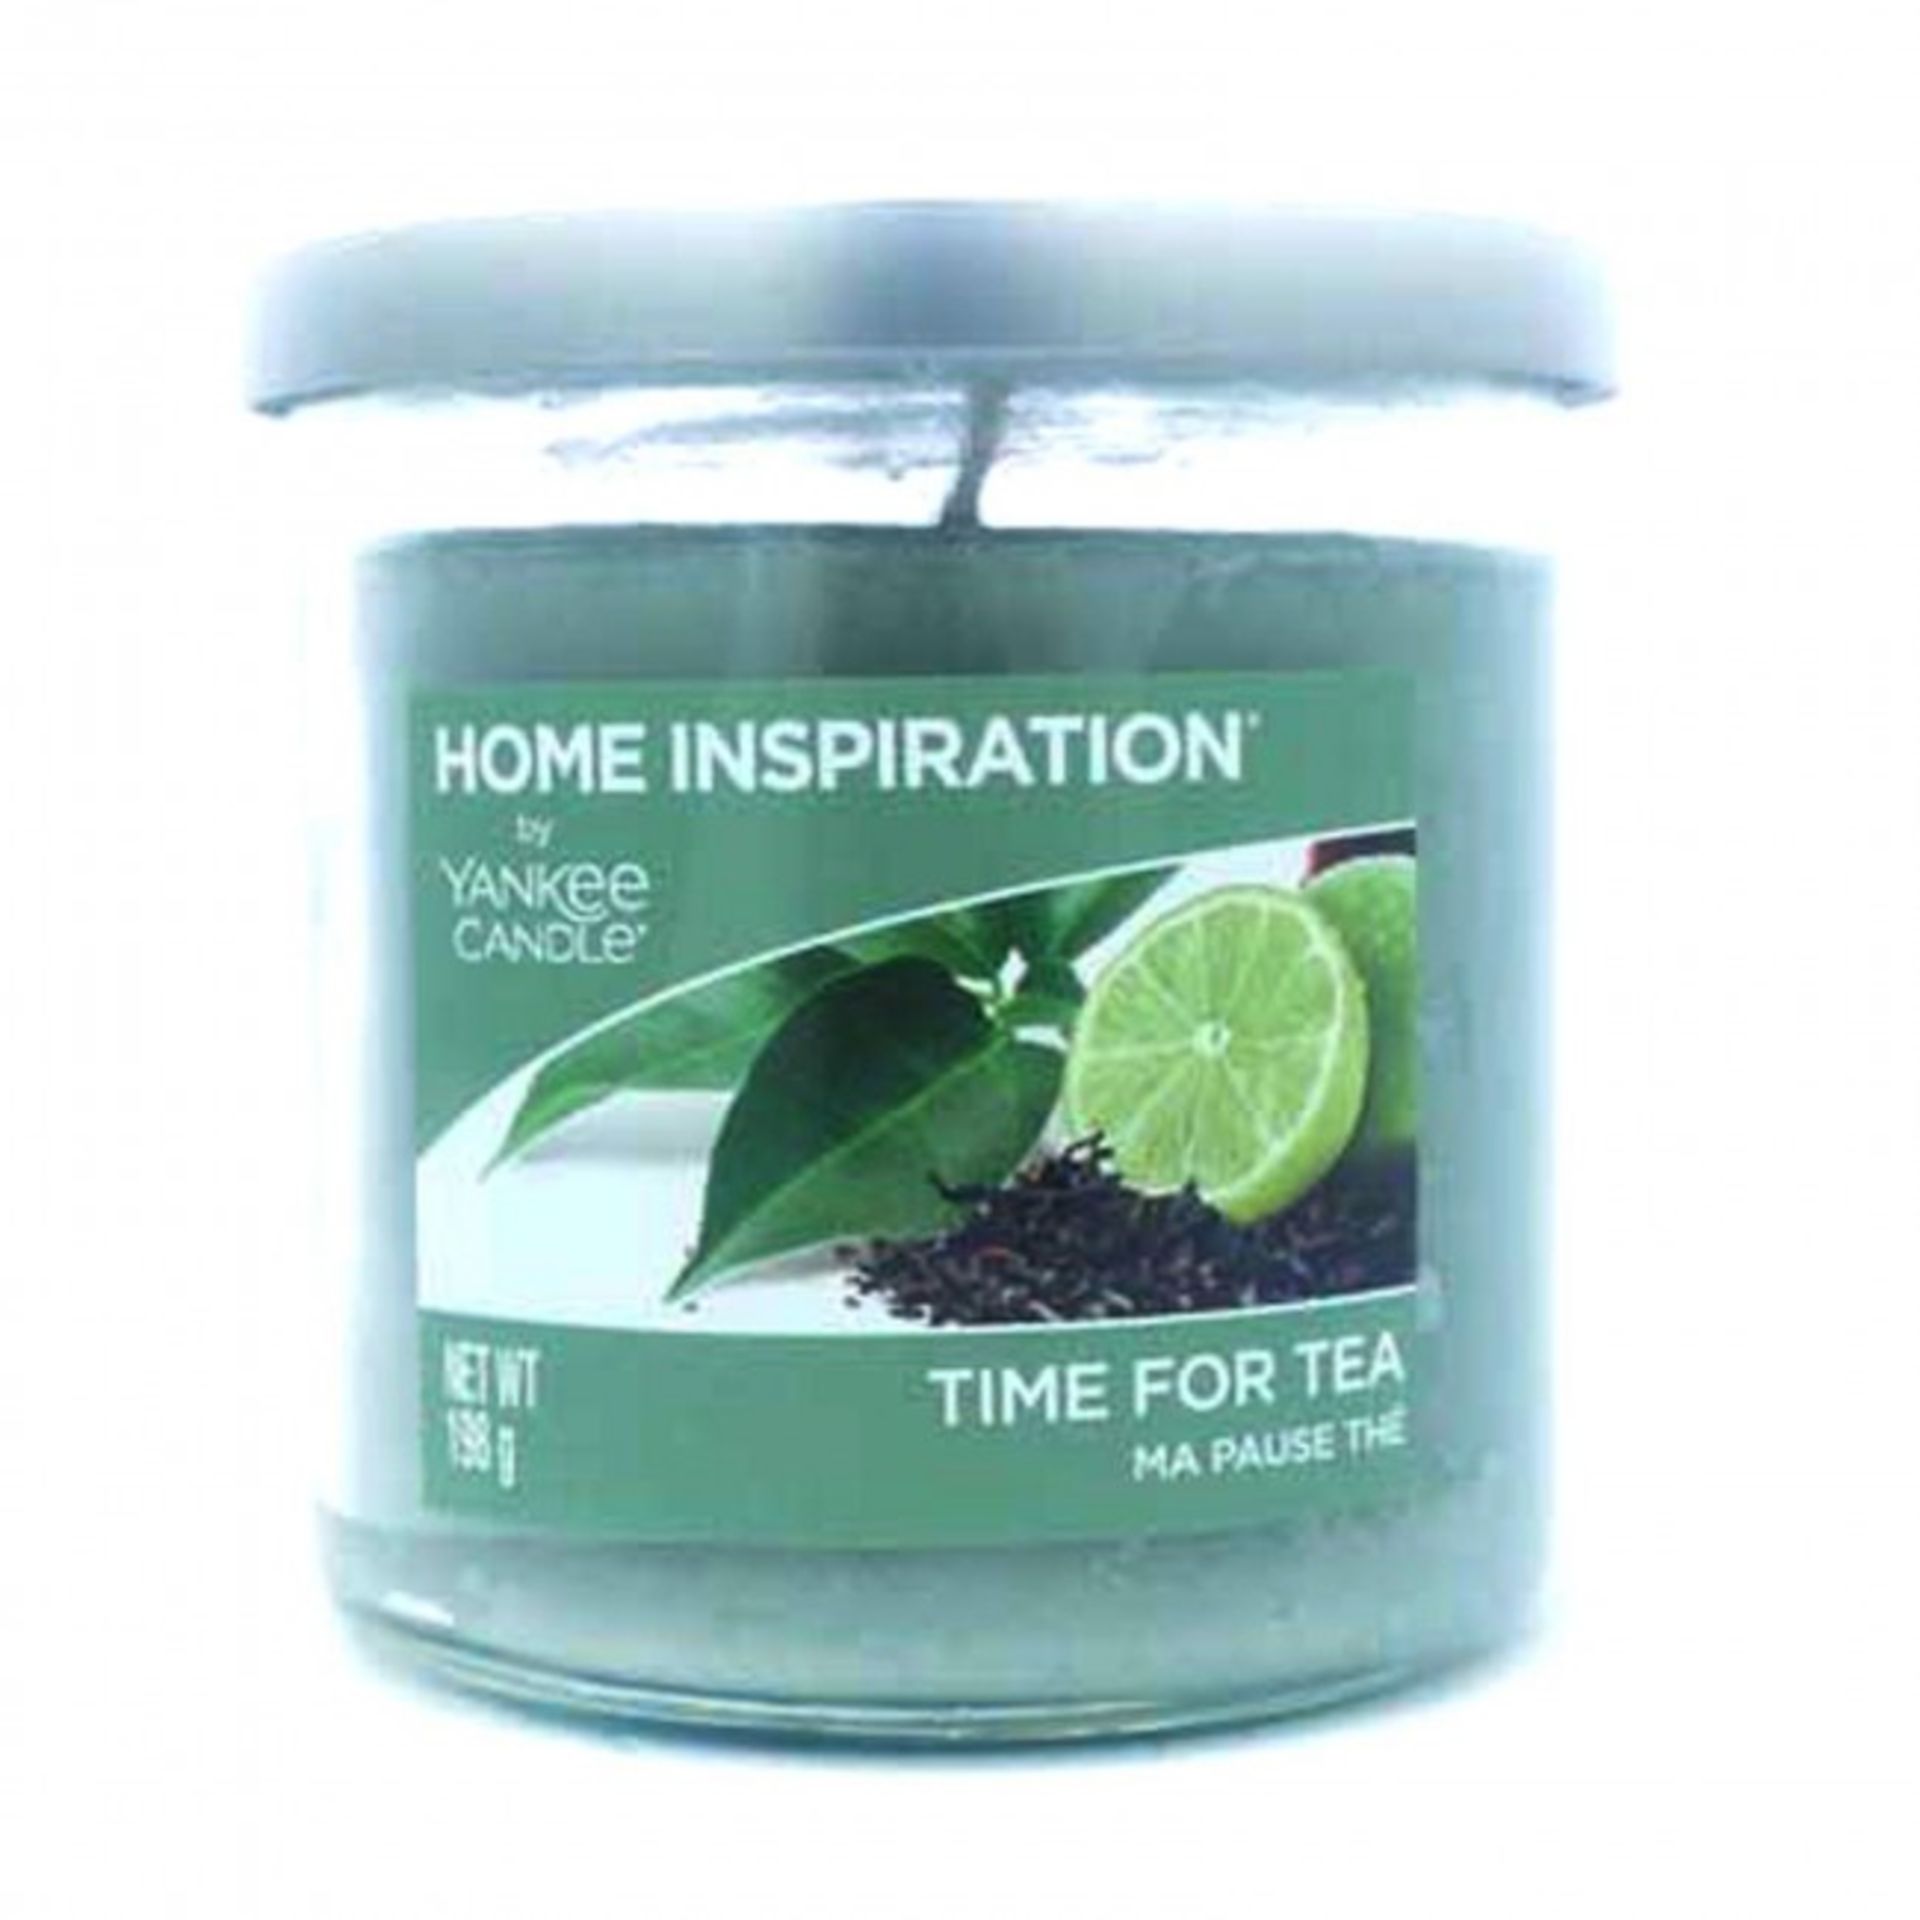 V Brand New Home Inspiration by Yankee Candle Time for Tea 198g Tumbler Candle - ISP £7.99 Ebay (